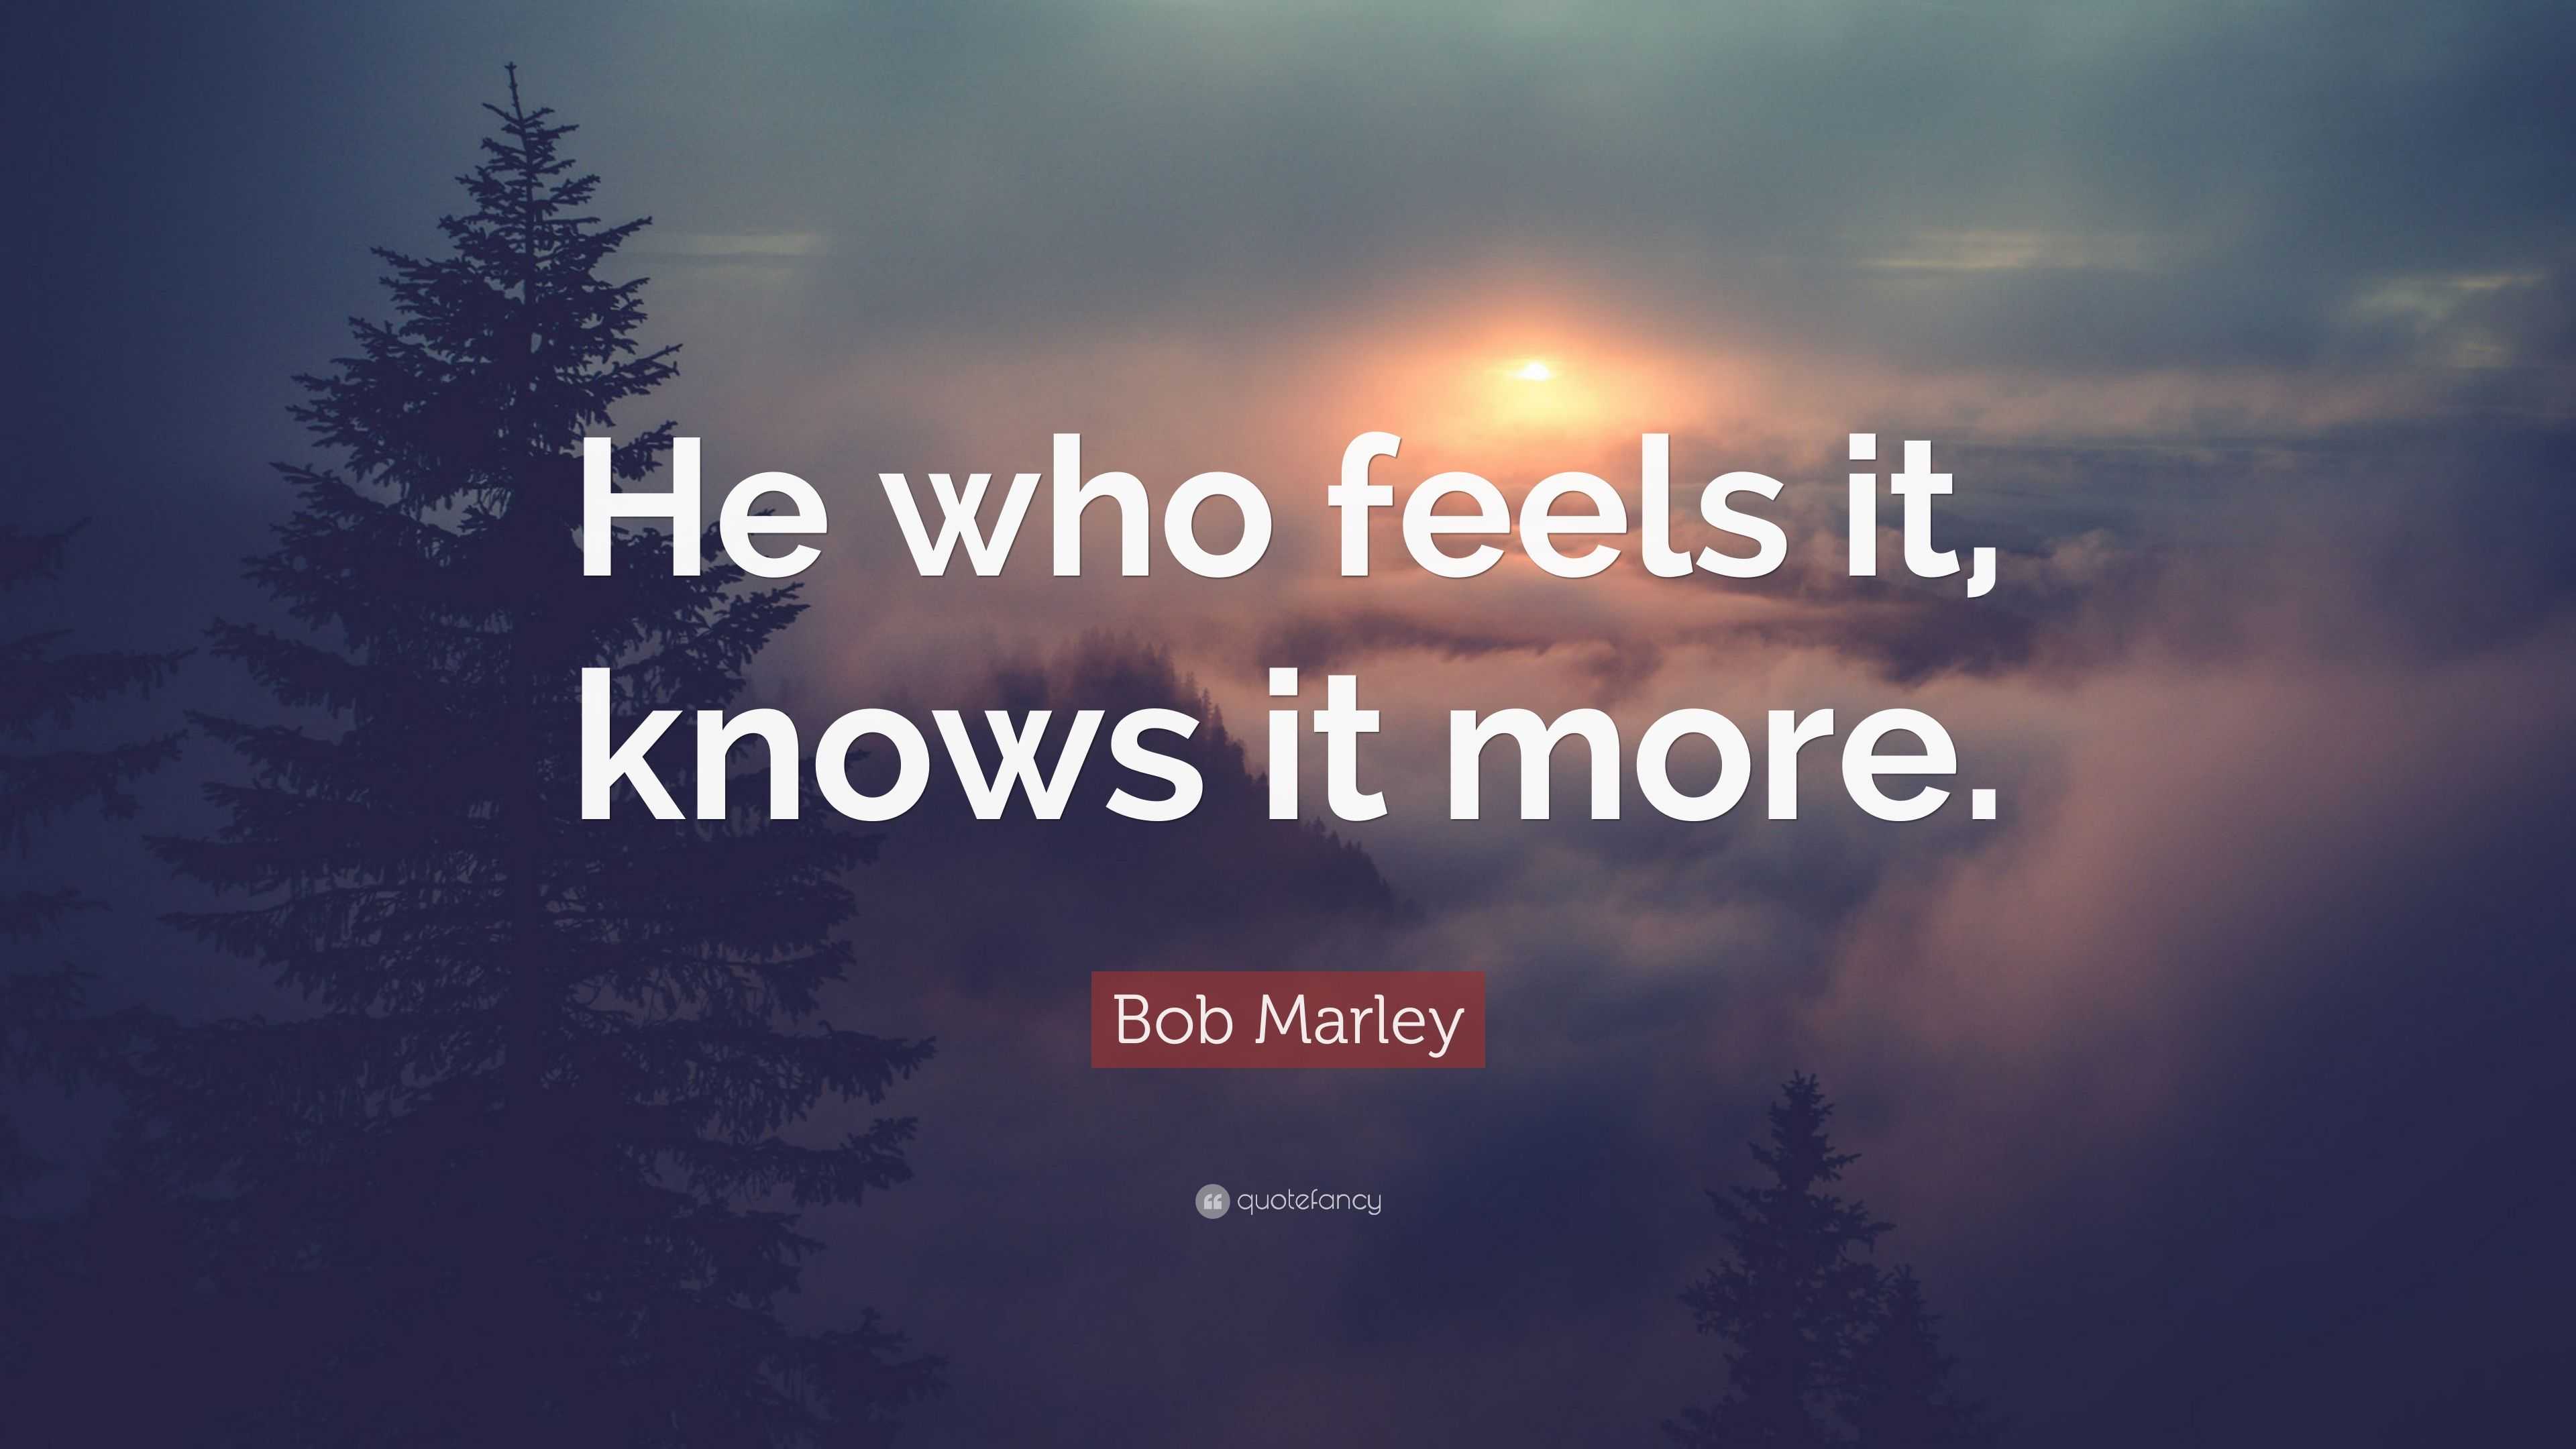 Bob Marley Quote: “He Who Feels It, Knows It More.”